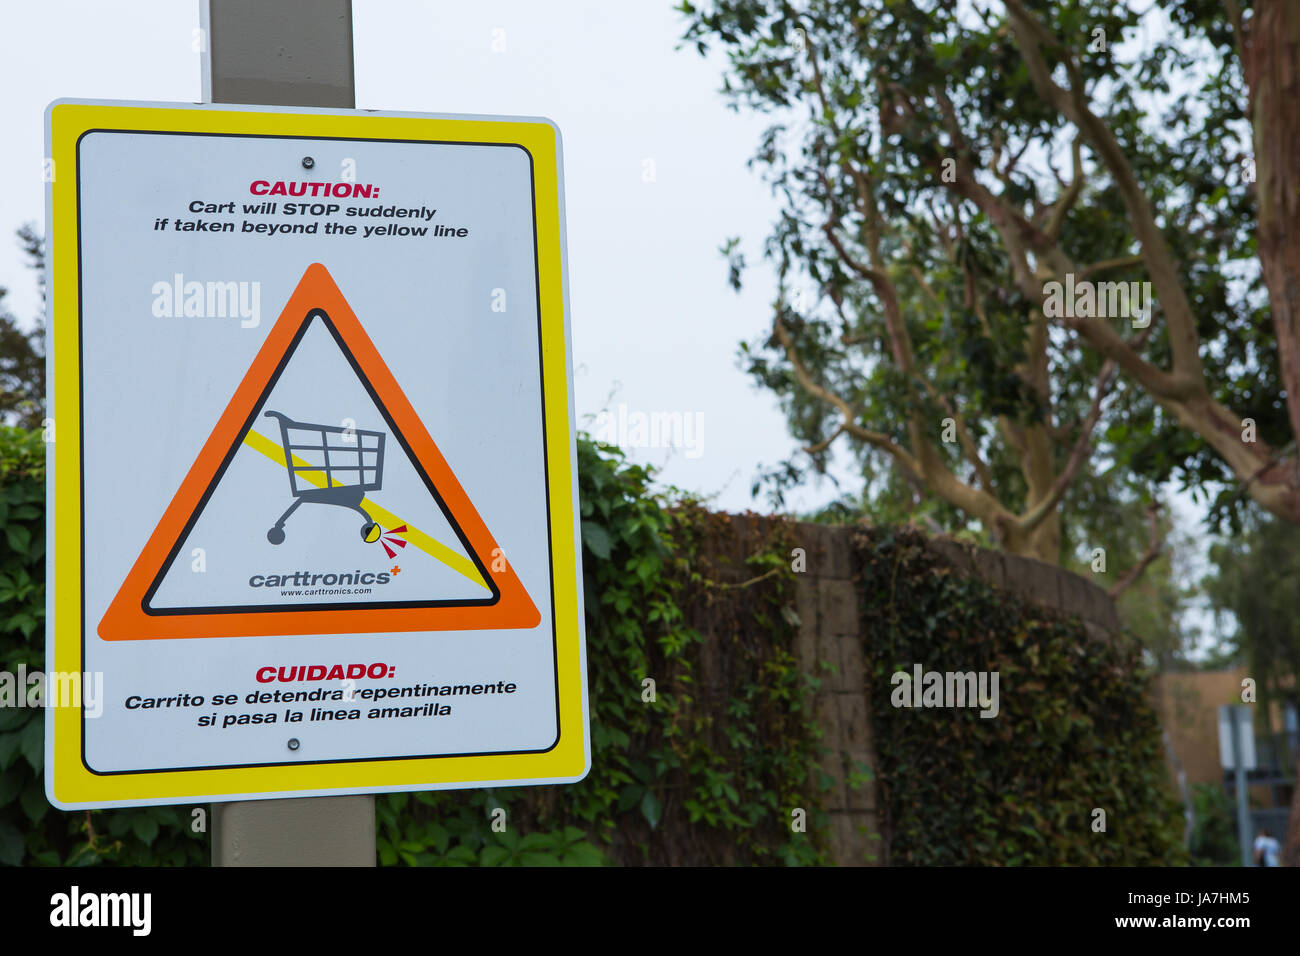 Caution carts will stop suddenly sign. Carttronics a developer of electronic systems used to stop the loss of shopping carts at retail stores, Stock Photo